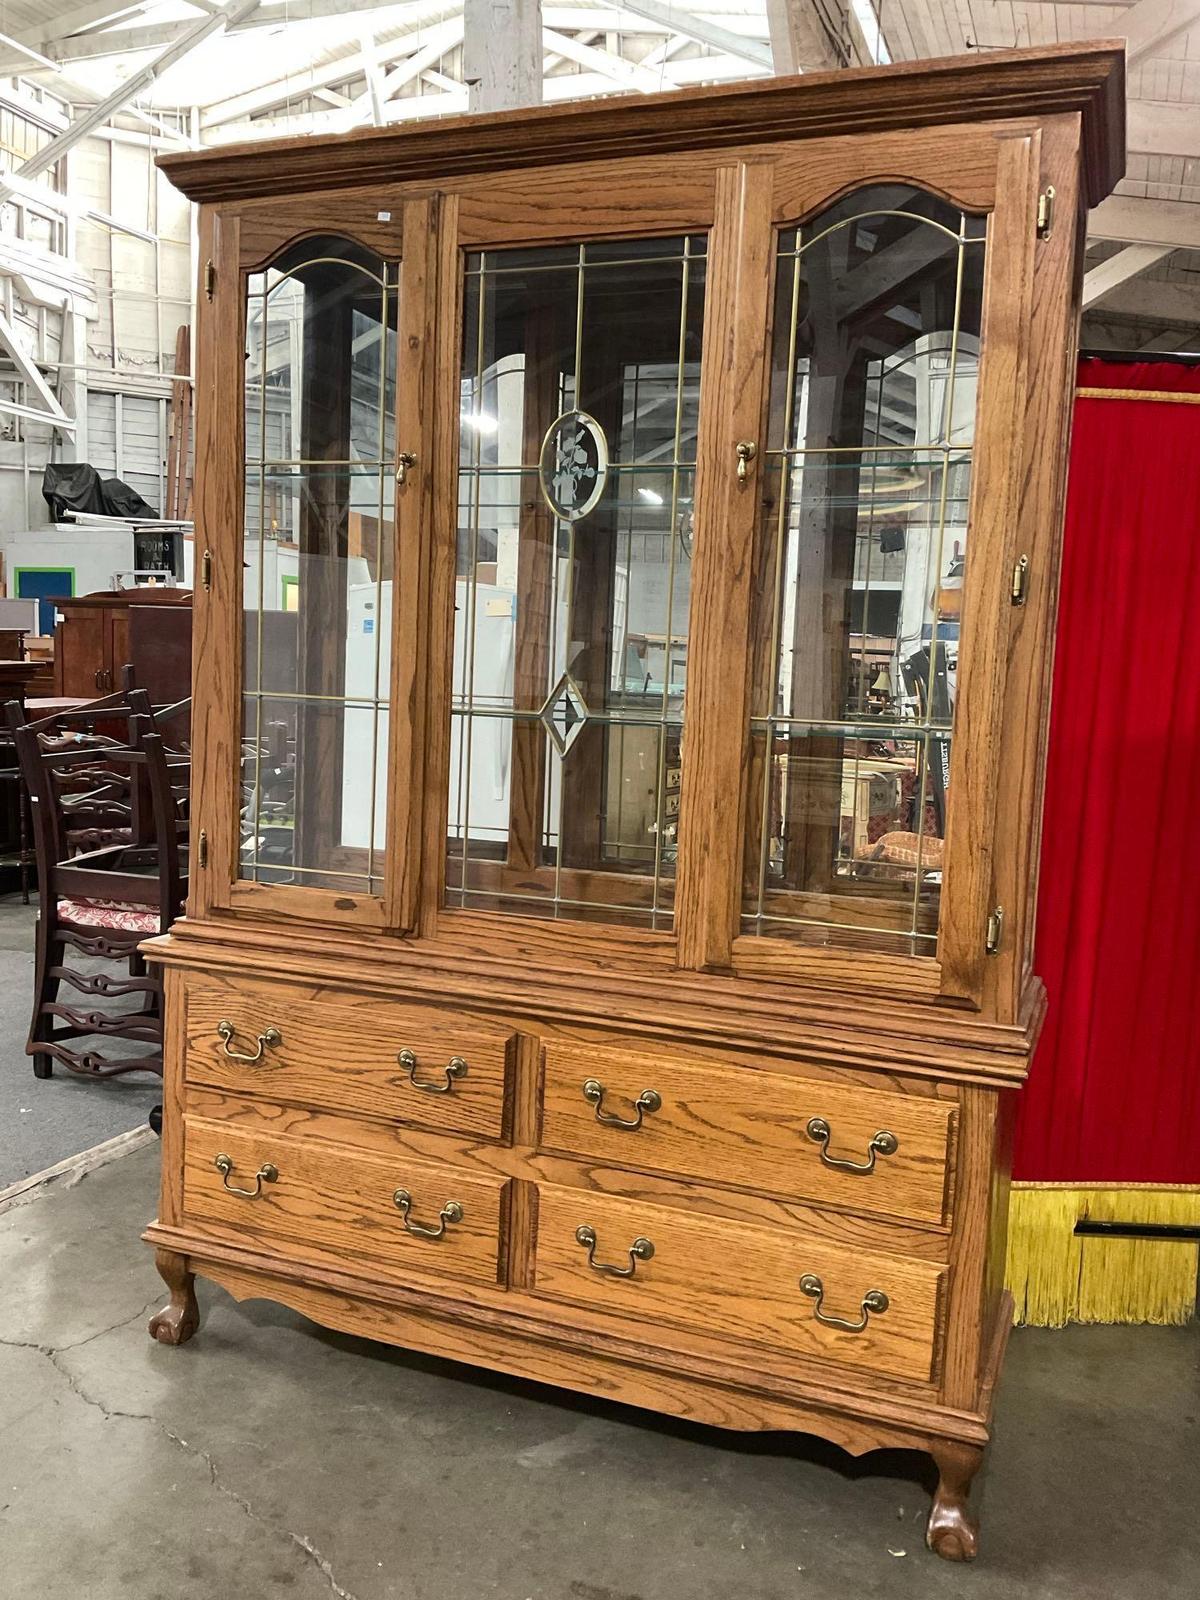 Vintage L&A Oak 2 Piece Glass Fronted Display Cabinet w/ 2 Glass Shelves & 4 Drawers. See pics.